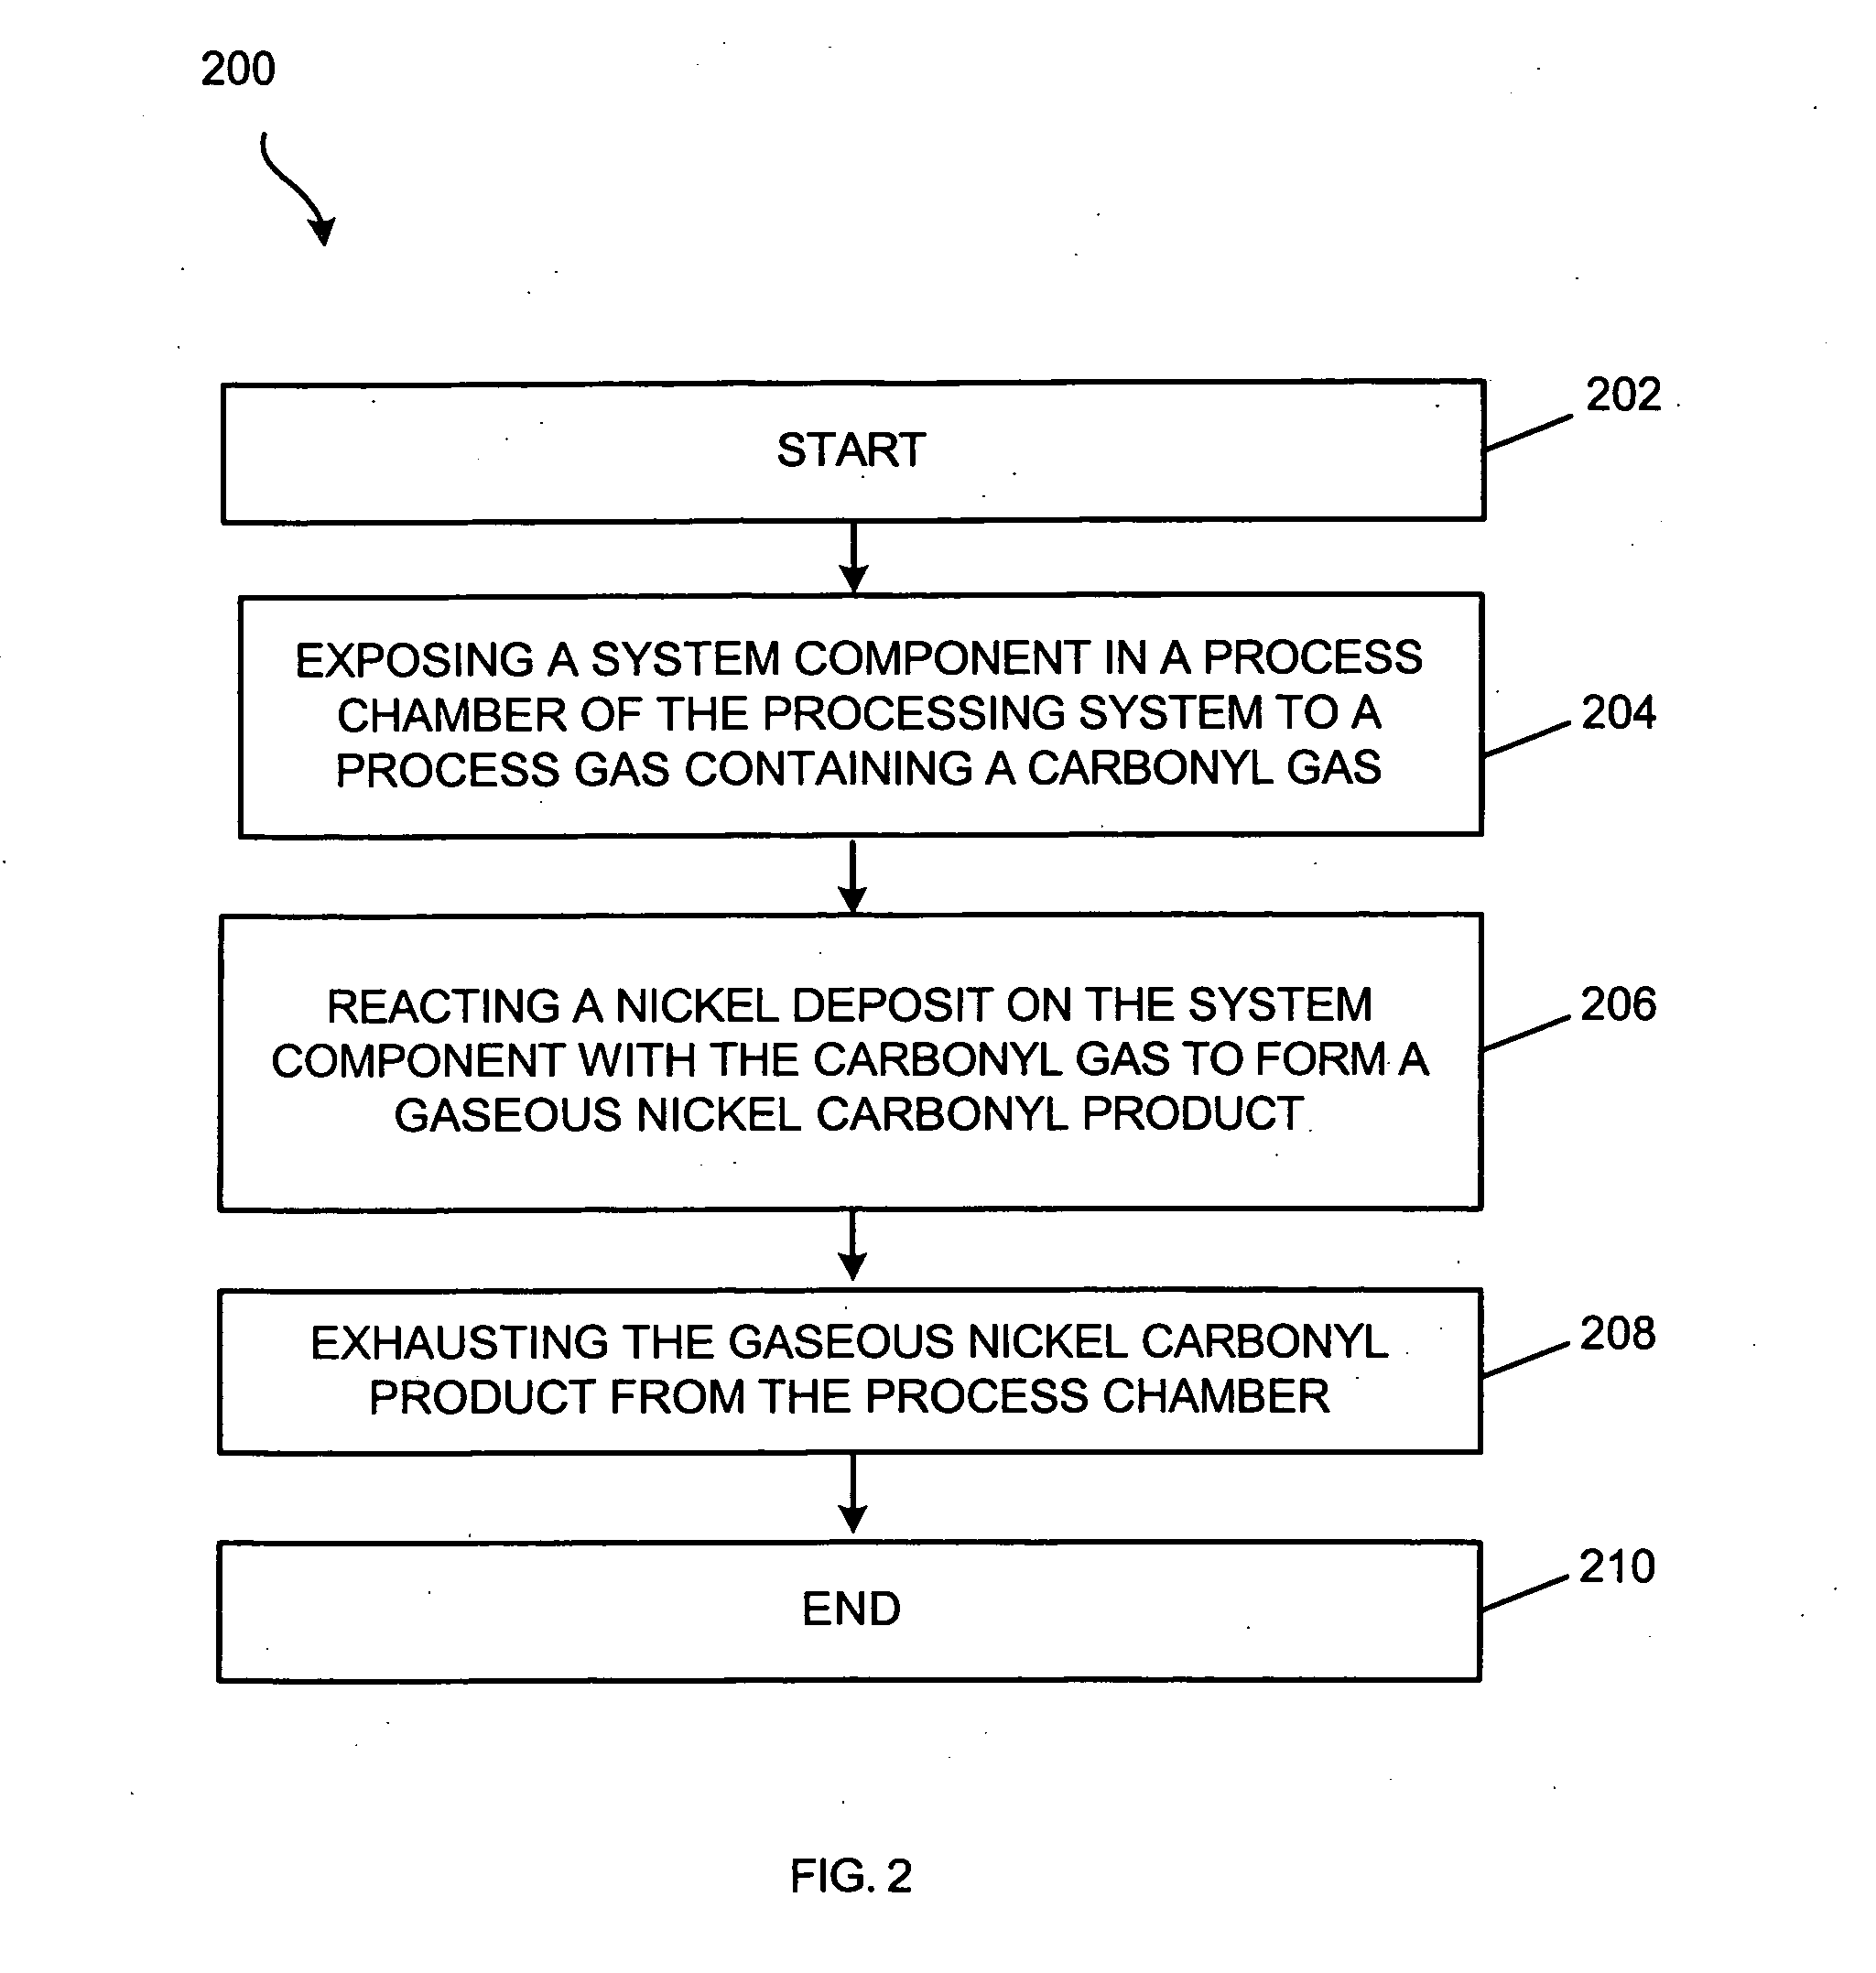 Method for dry cleaning nickel deposits from a processing system